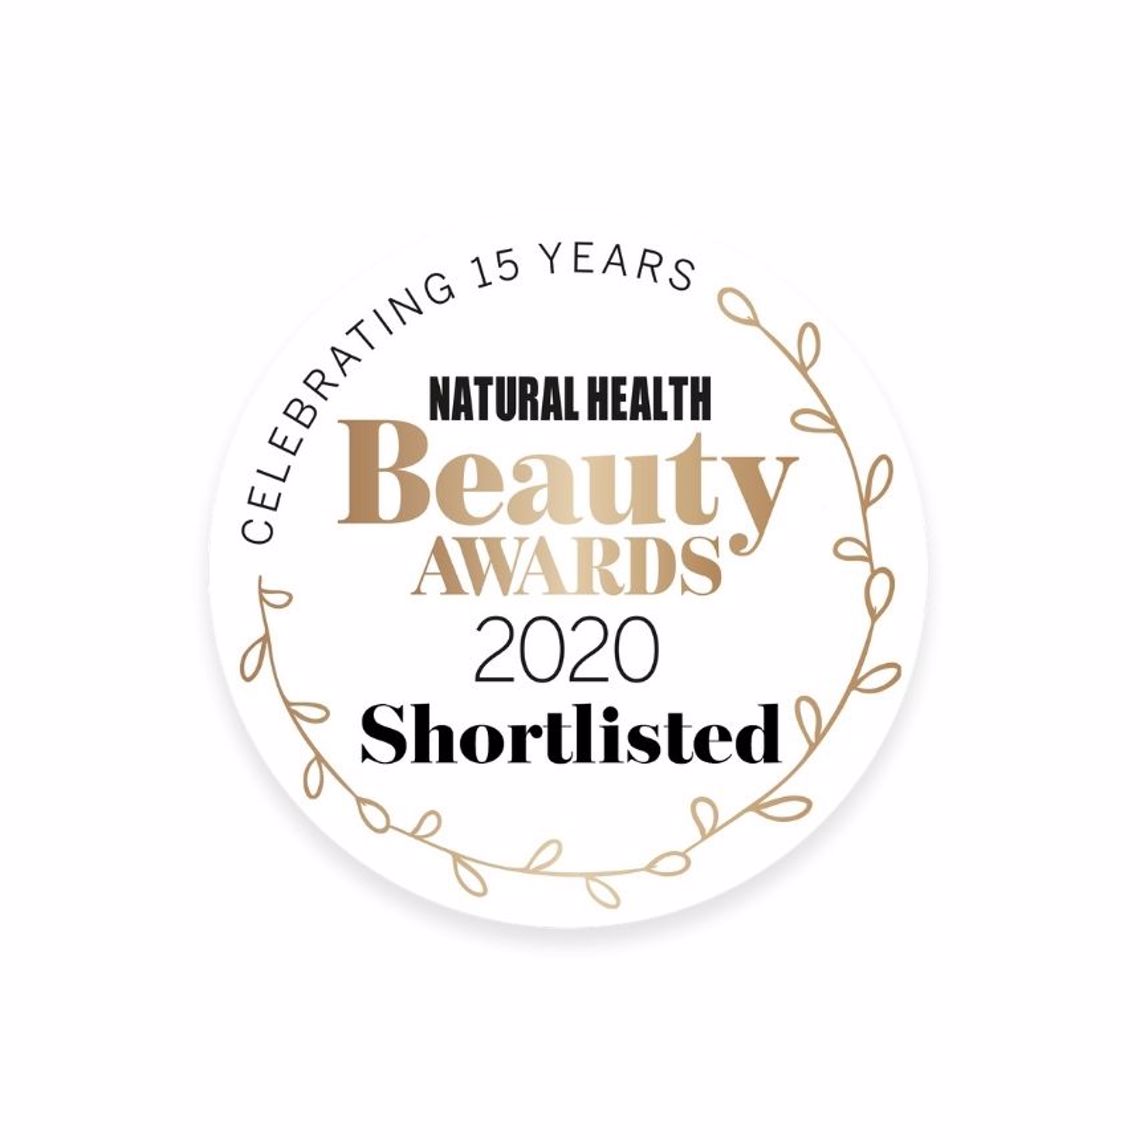 Natural Health Beauty Awards 2020 we're shortlisted